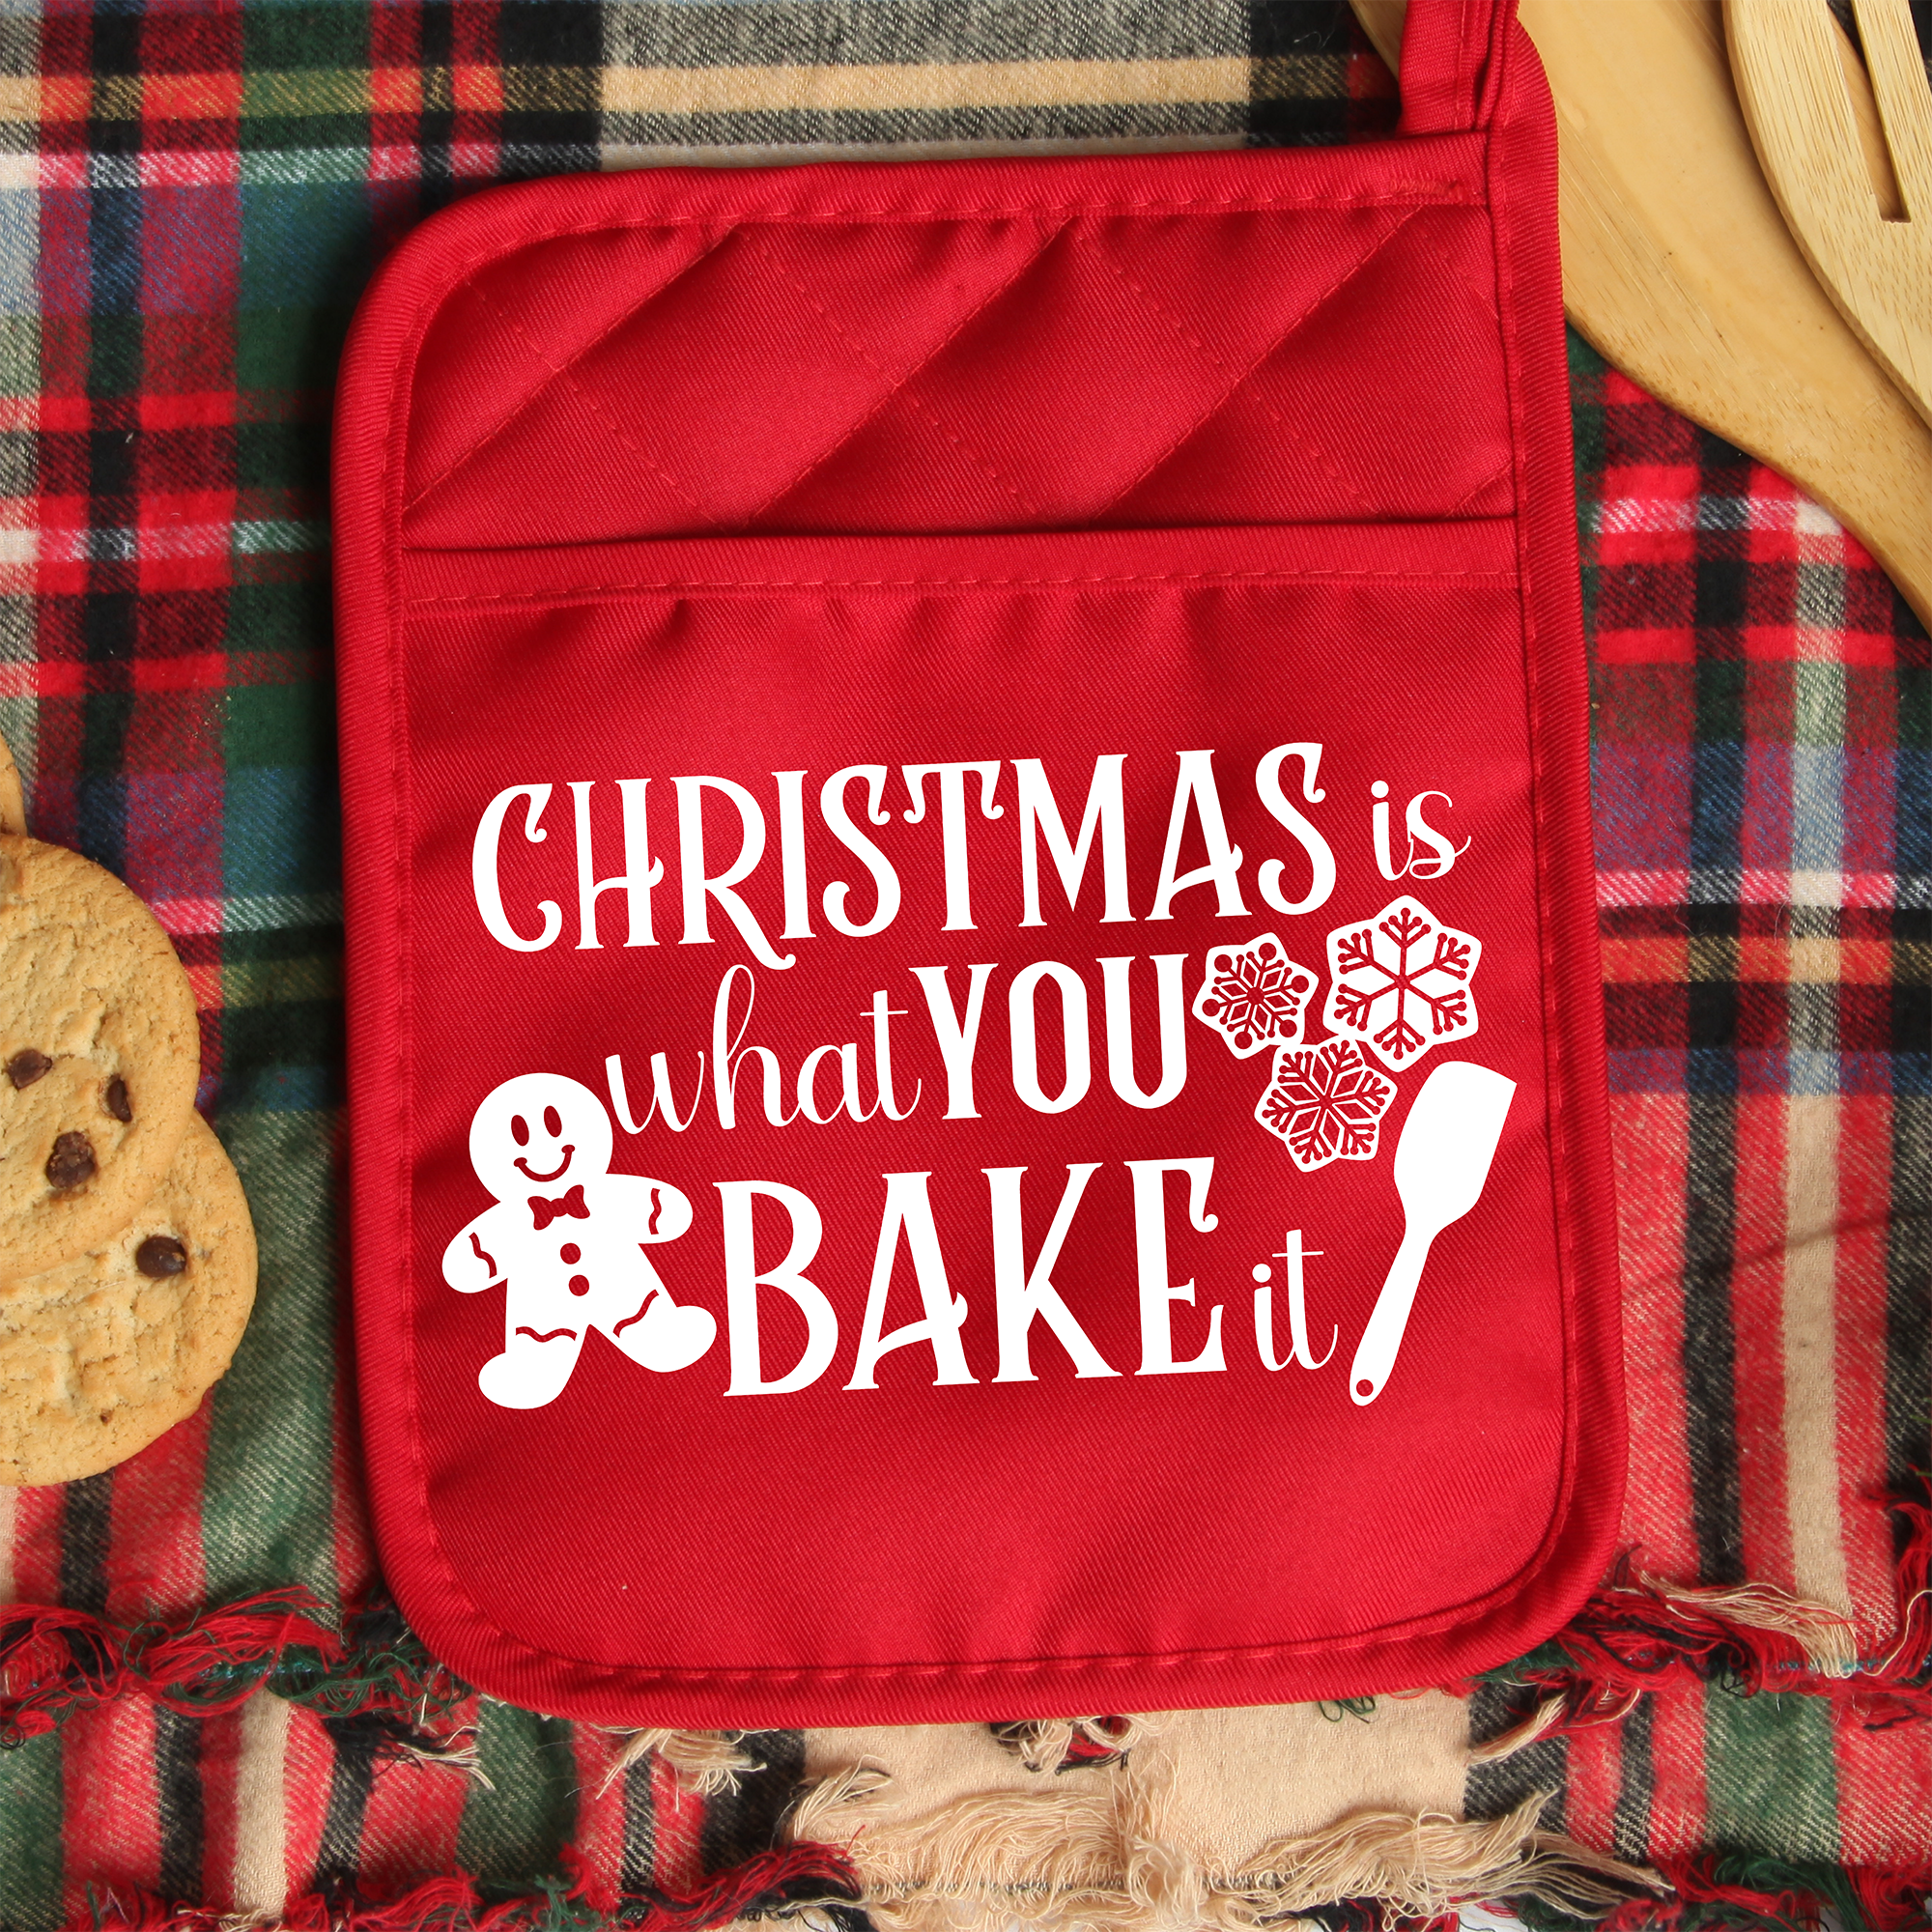 Christmas Pot Holder SVG File - Christmas Is What You Bake It for Cricut/Silhouette crafting designs - Commercial Use SVG Files for Cricut & Silhouette